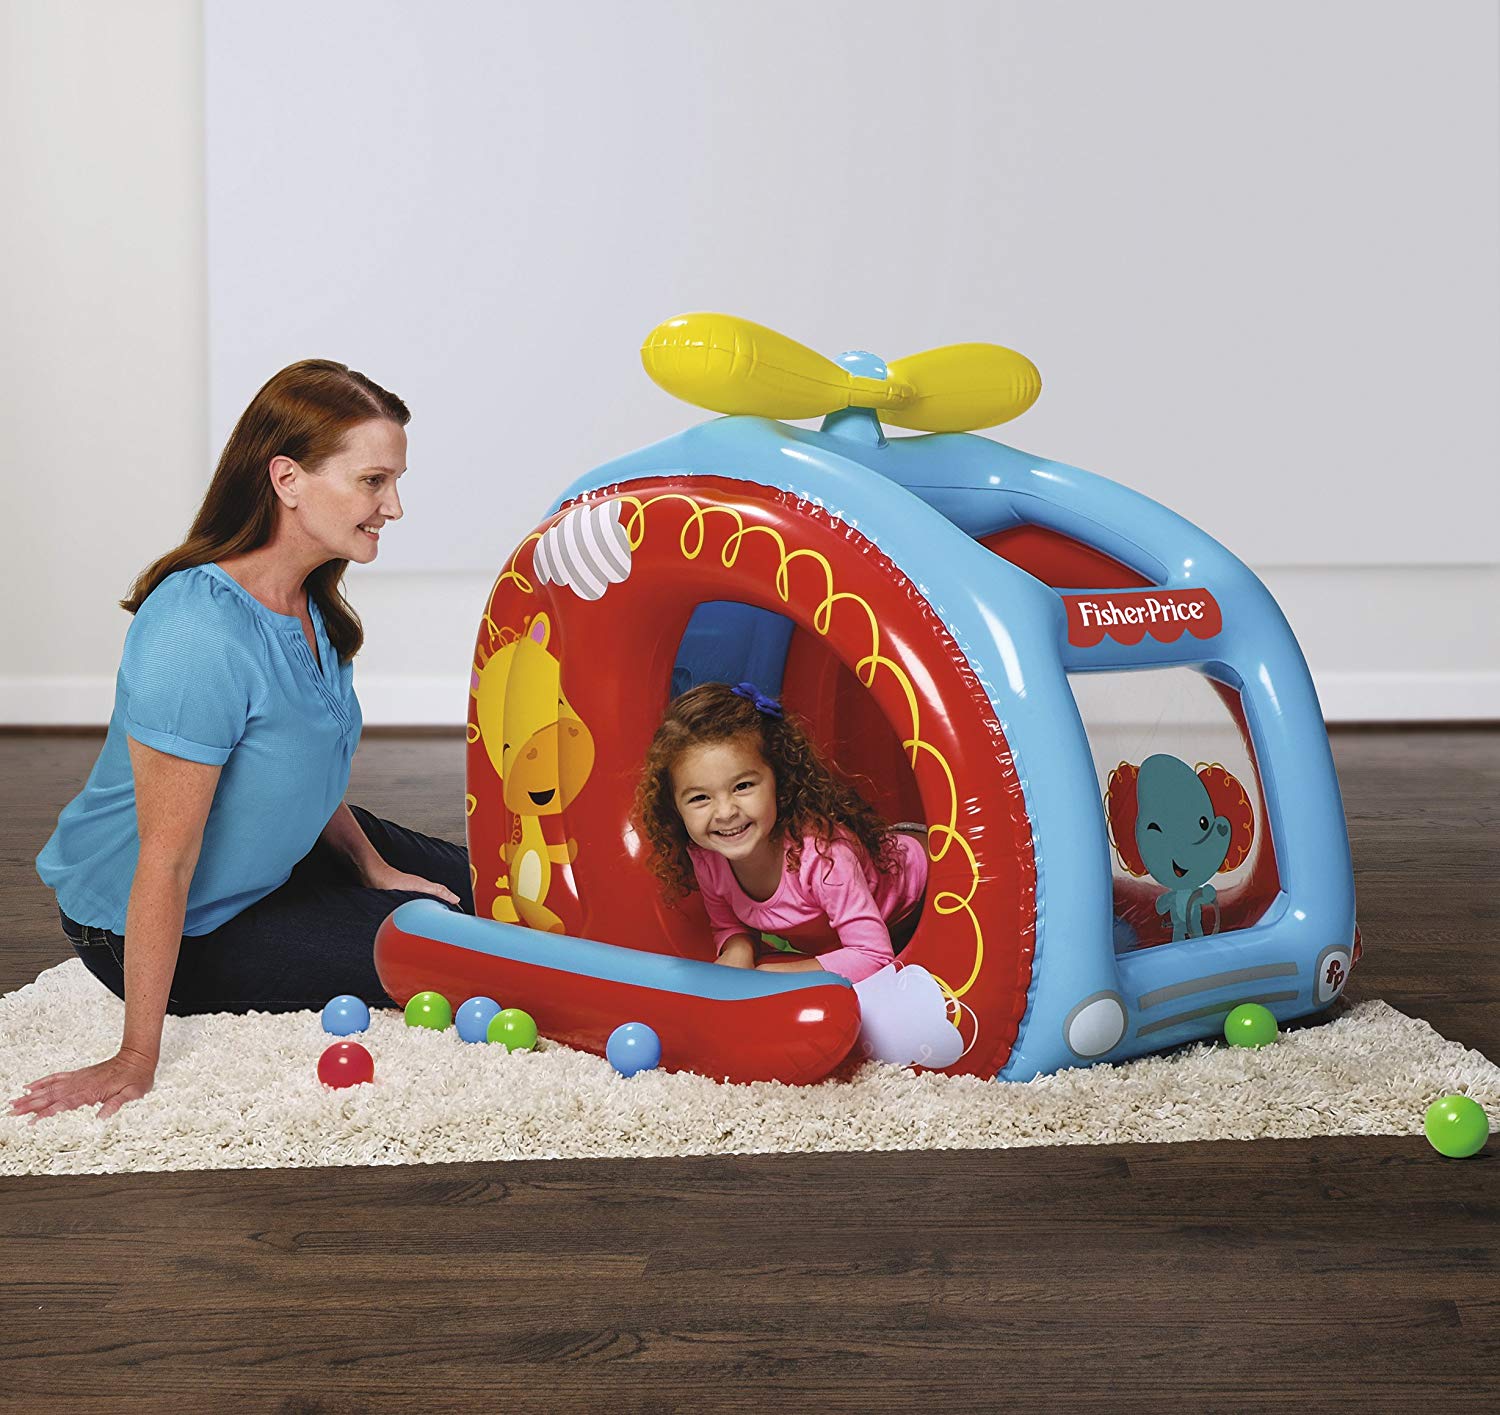 Fisher-Price - Helicopter Ball Pit (54" x 44" x 38"/1.37m x 1.12m x 97cm)